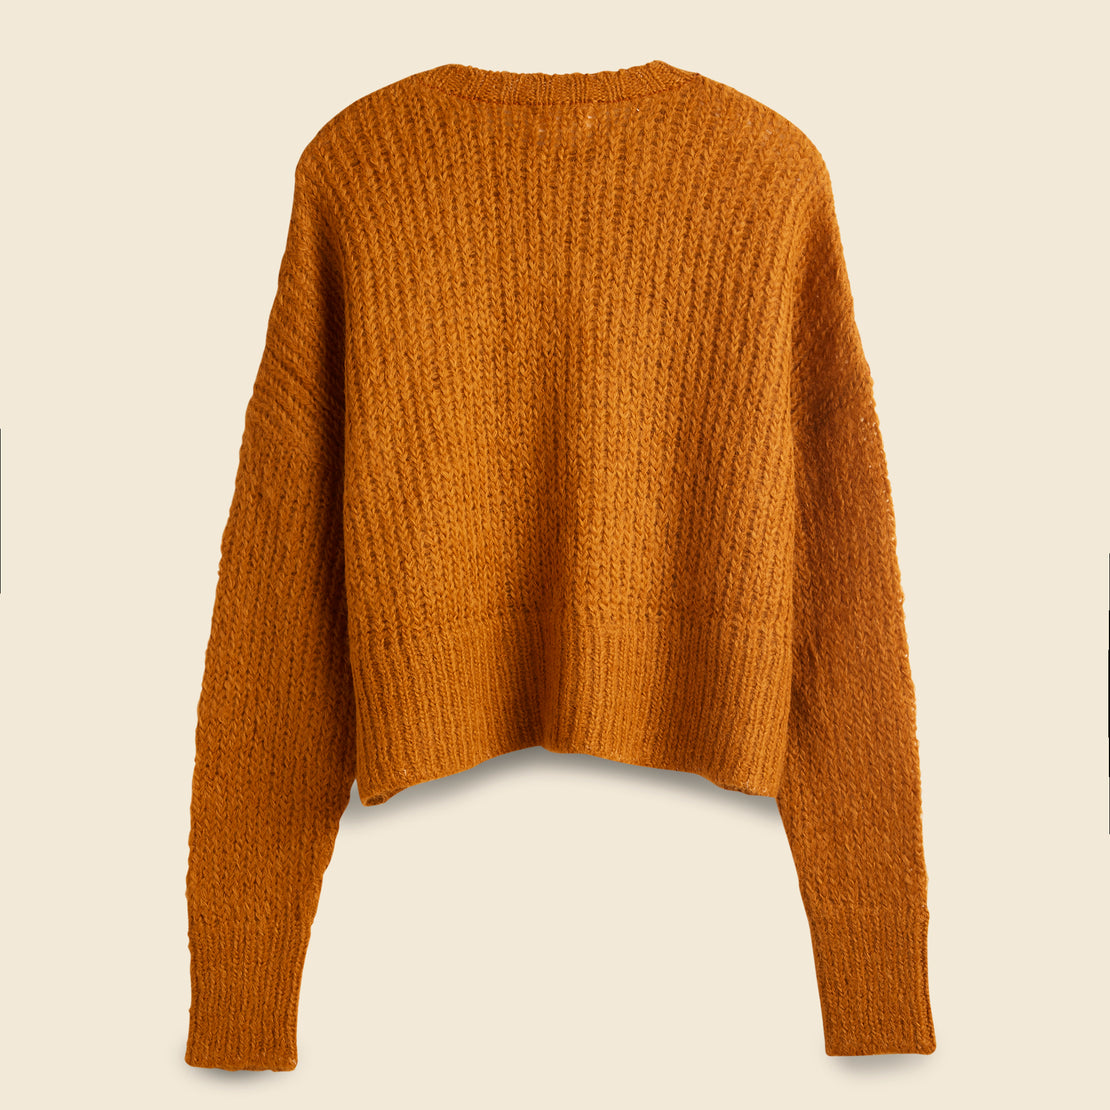 Bailey Top - Rust - Atelier Delphine - STAG Provisions - W - Tops - Sweater